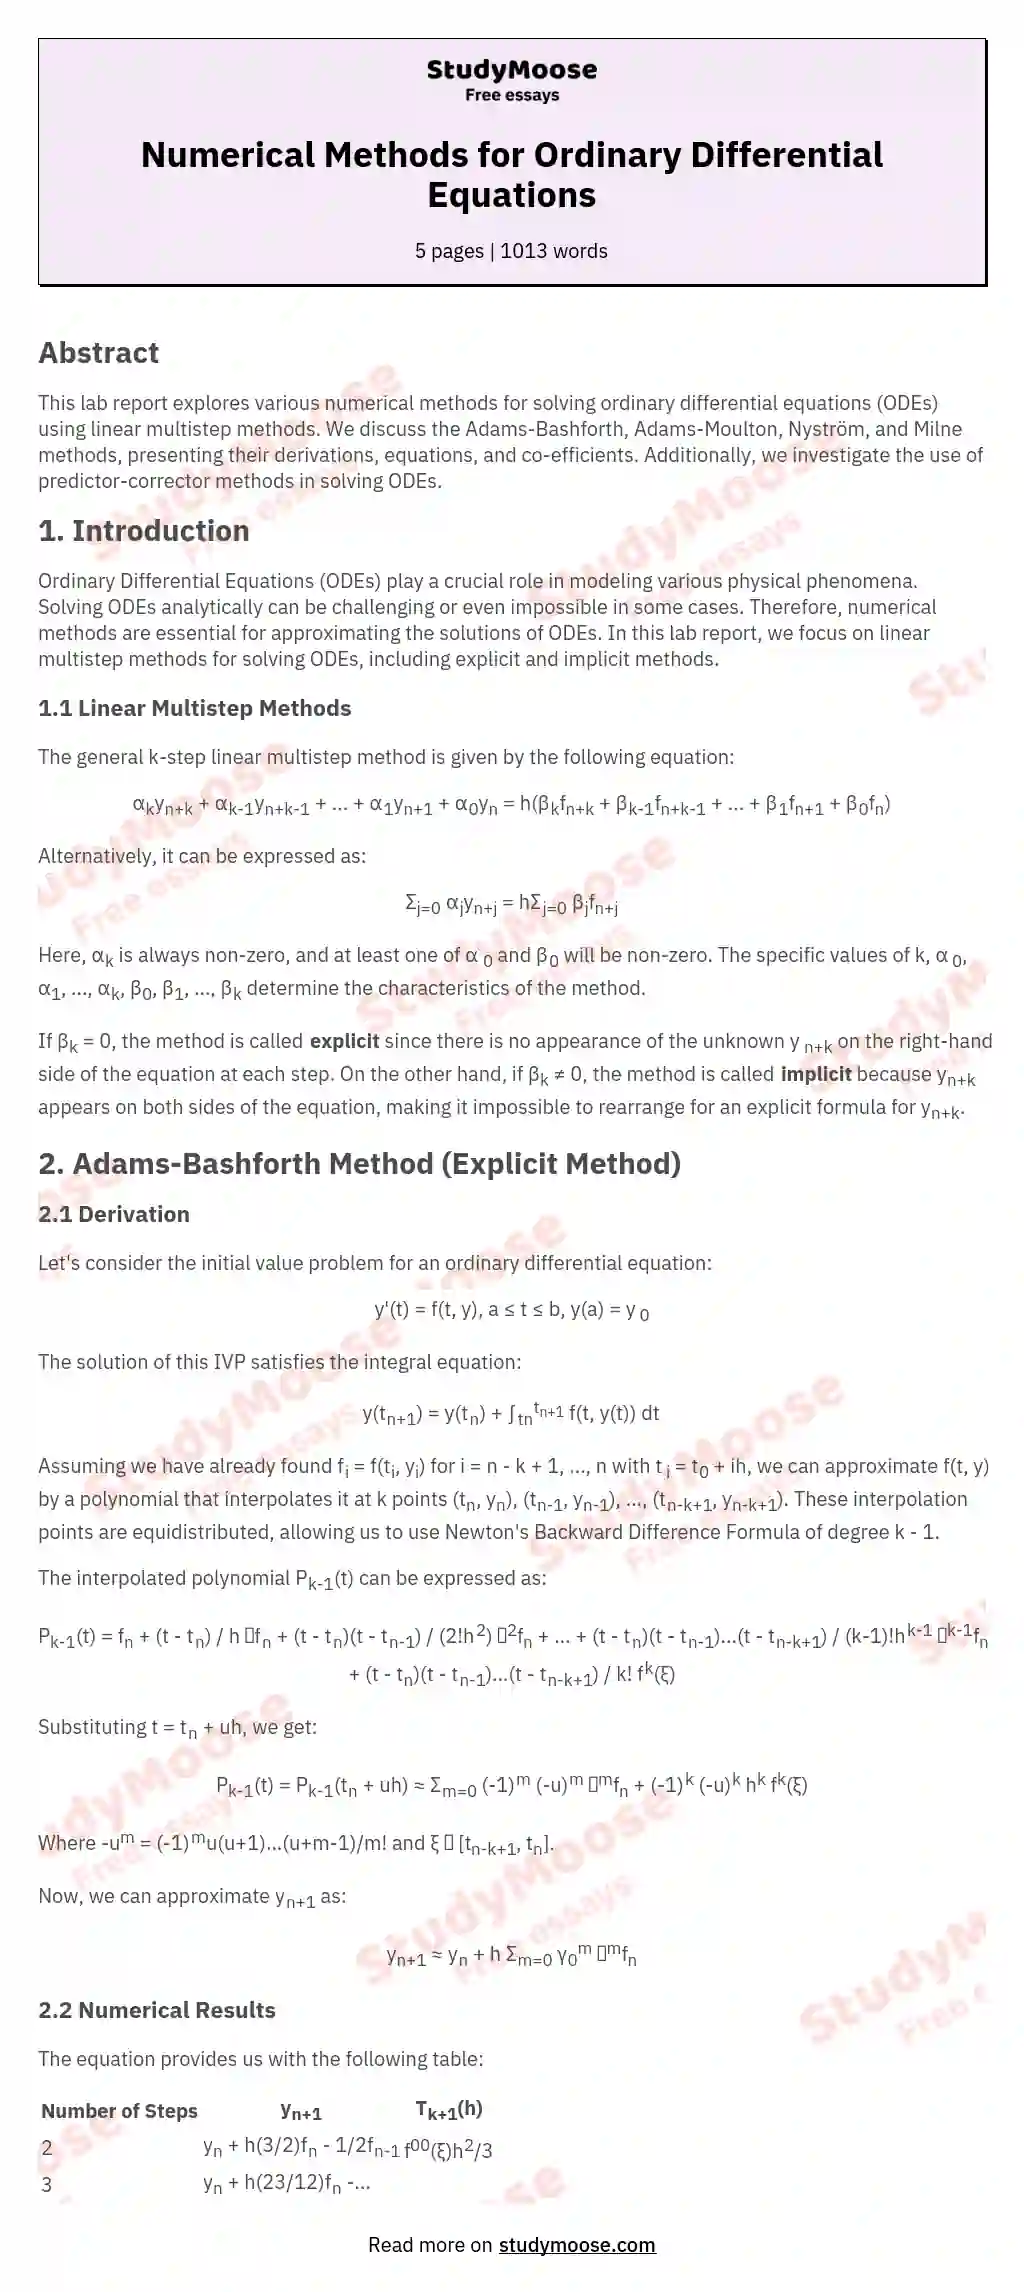 Numerical Methods for Ordinary Differential Equations essay